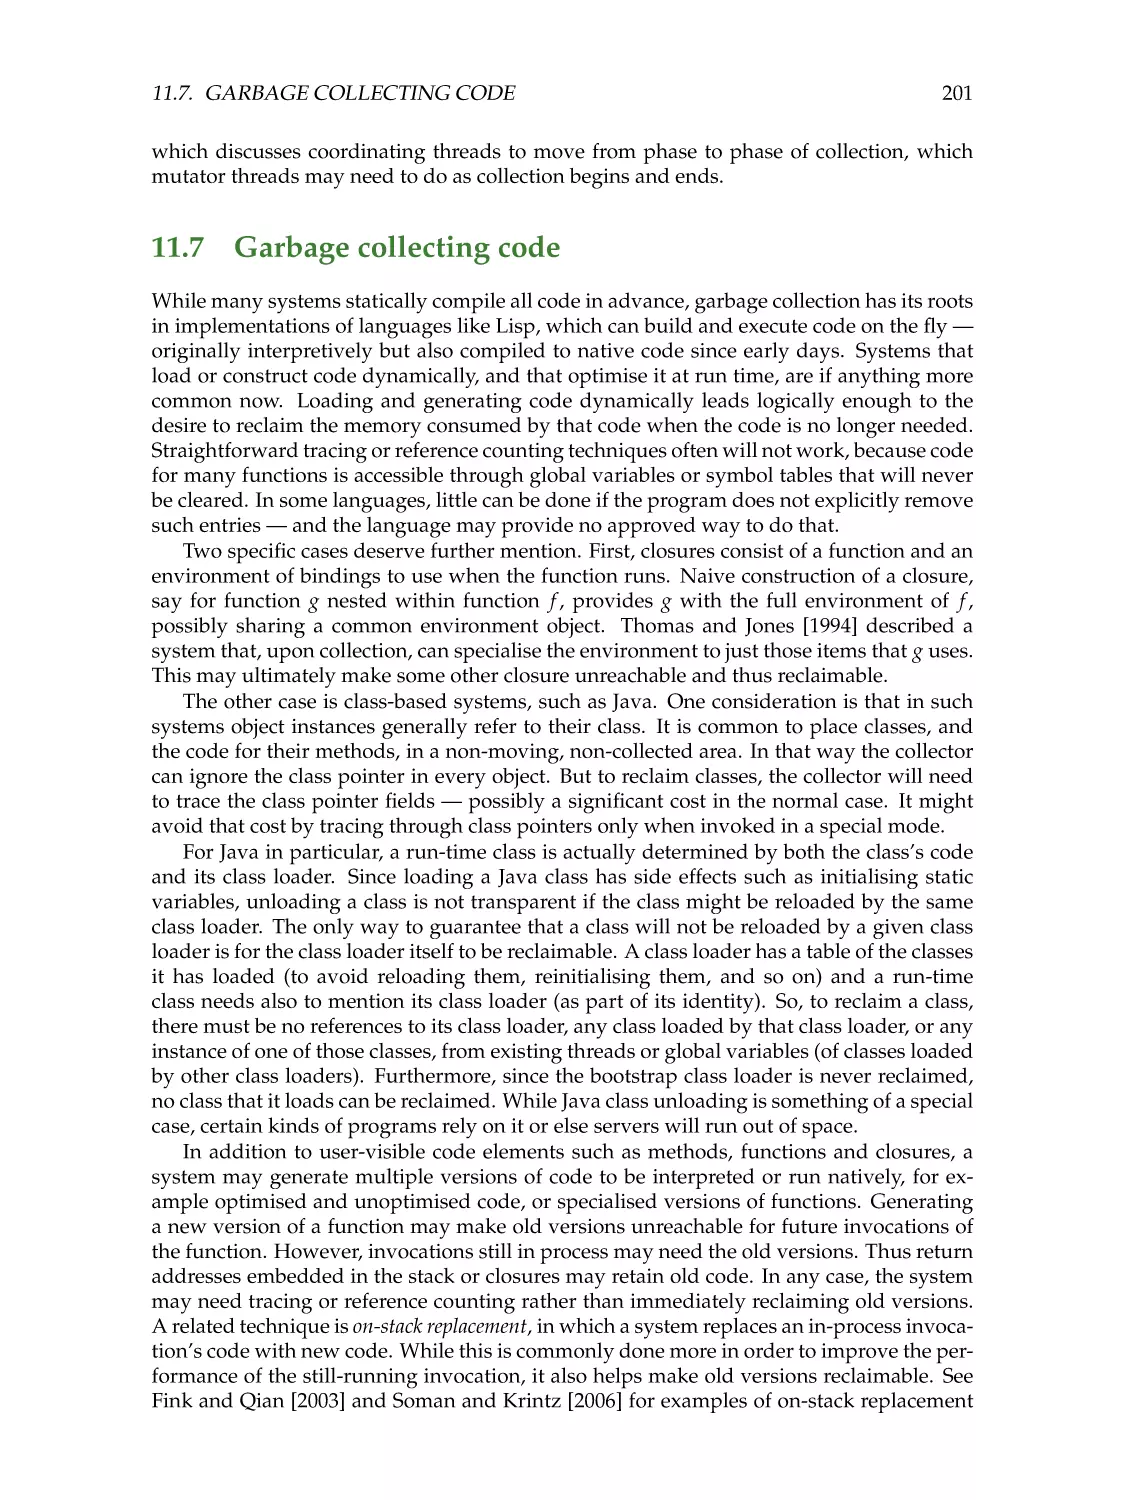 11.7. Garbage collecting code